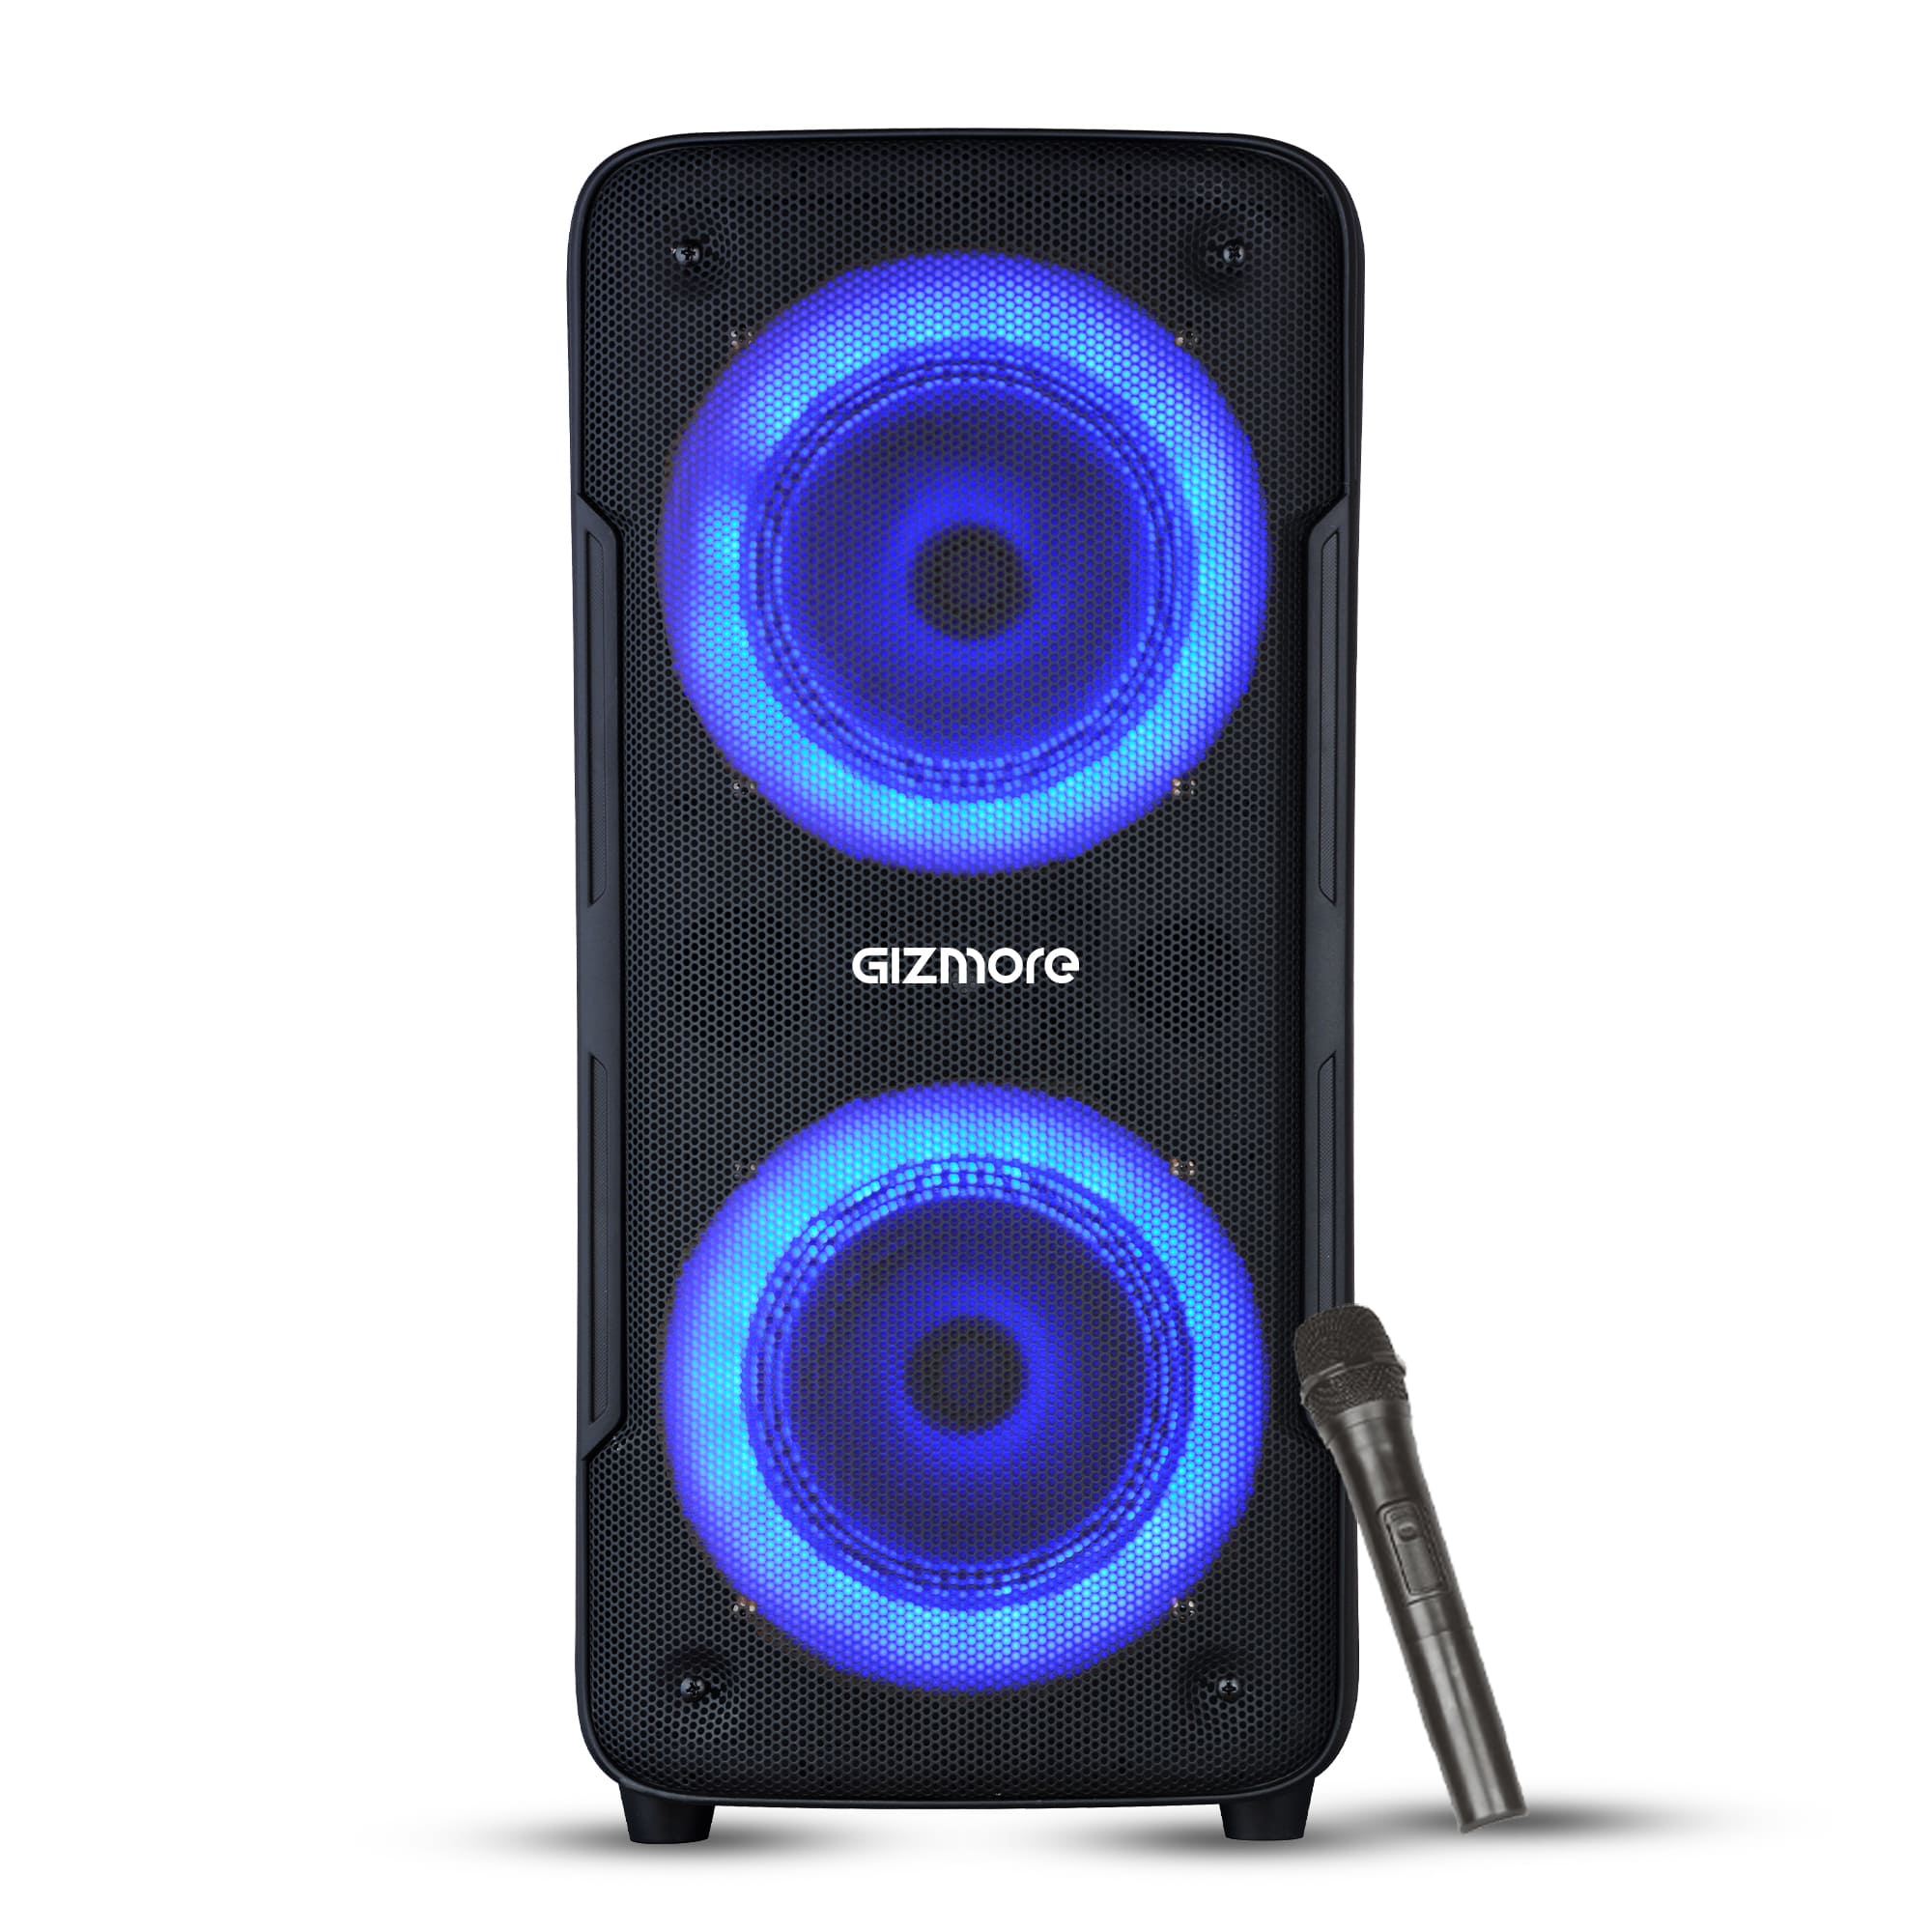 Gizmore 40Watt Wheelz T4000 Portable Party Speaker with Wireless Mic and TWS function